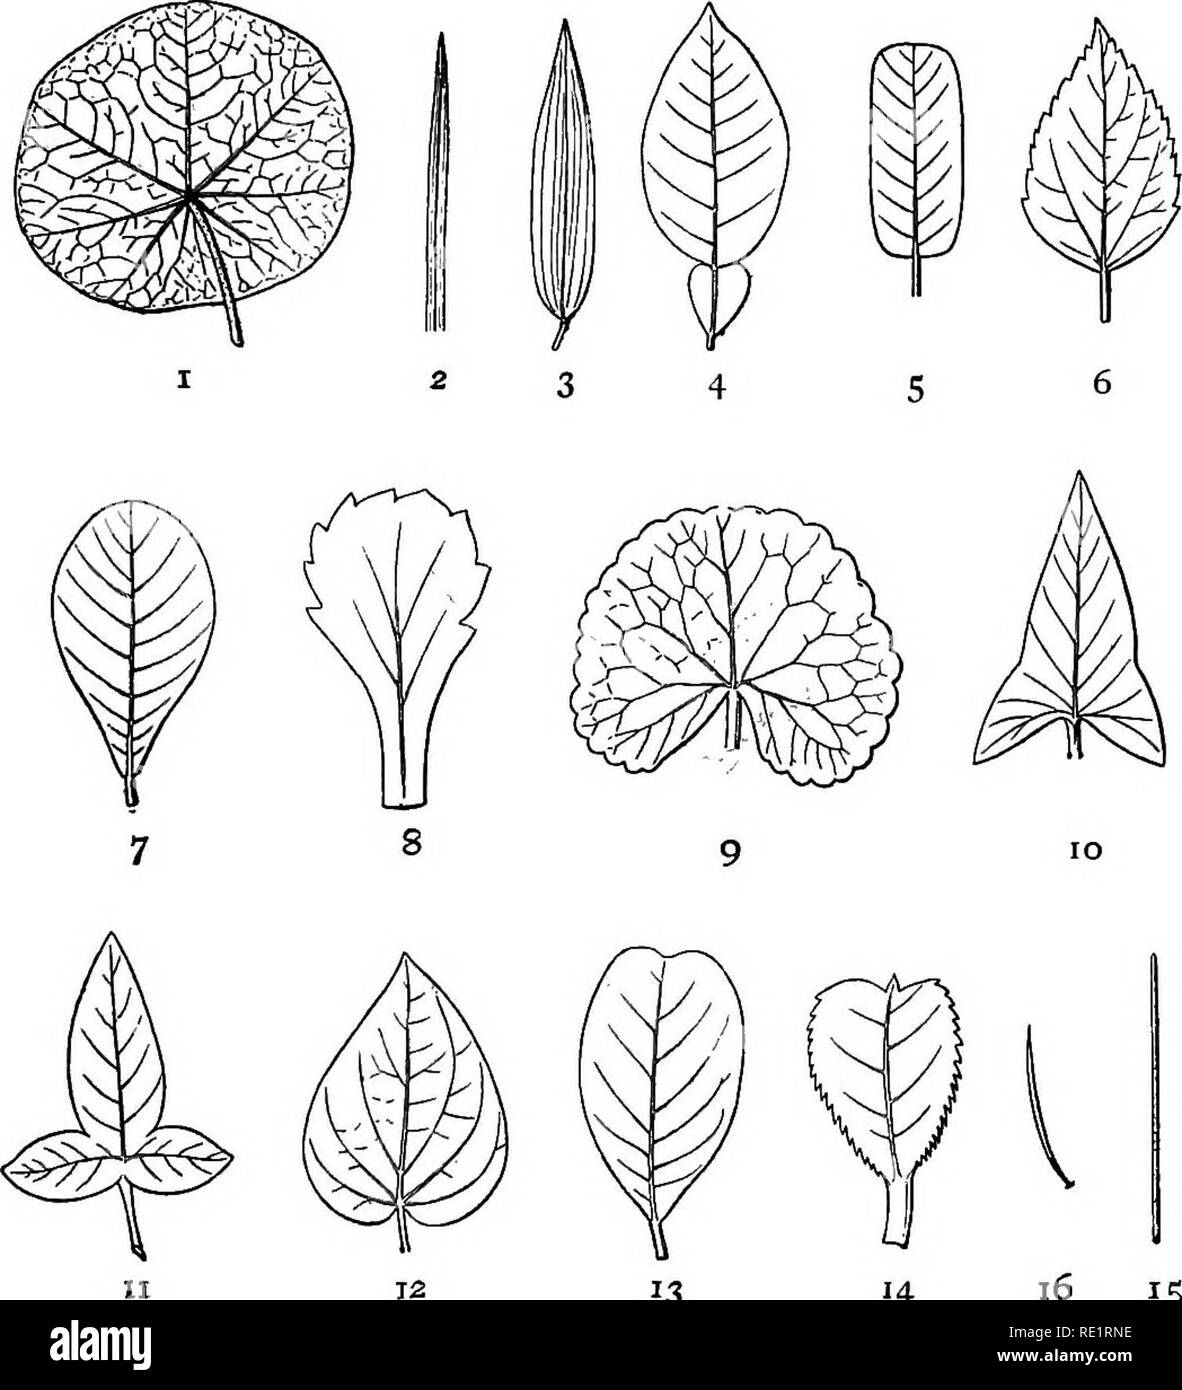 . A manual of Indian botany. Botany. THE LEAF 33 TiCAL, as in golap-jam {Eugenia Jambos); (5) oblong, as in Plantain; (6) ovate or egg-shaped, as in. 12 13 Fig. 29.—Shapes of Leaves 14 16 IS I, Orbicular. 2, Linear, 3, Lanceolate. 4, Elliptical. 5, Oblong-. 6, Ovate. 7, Obovate. 8, Spathulate. 9, Reniform. lo, Sagittate. 11, Hastate. 12, Cor- date. 13. Obcordate. 141 Cuneate. 15, Filiform. 16, Subulate. Banyan; (7) obovate or ovate reversed, as in deshi- badam (Terminalia Catappa); (8) spathulate or spatula-shaped, as in Drosera Burmanni; (9) reni- form or kidney-shaped, as in thul-kuri (Hydro Stock Photo